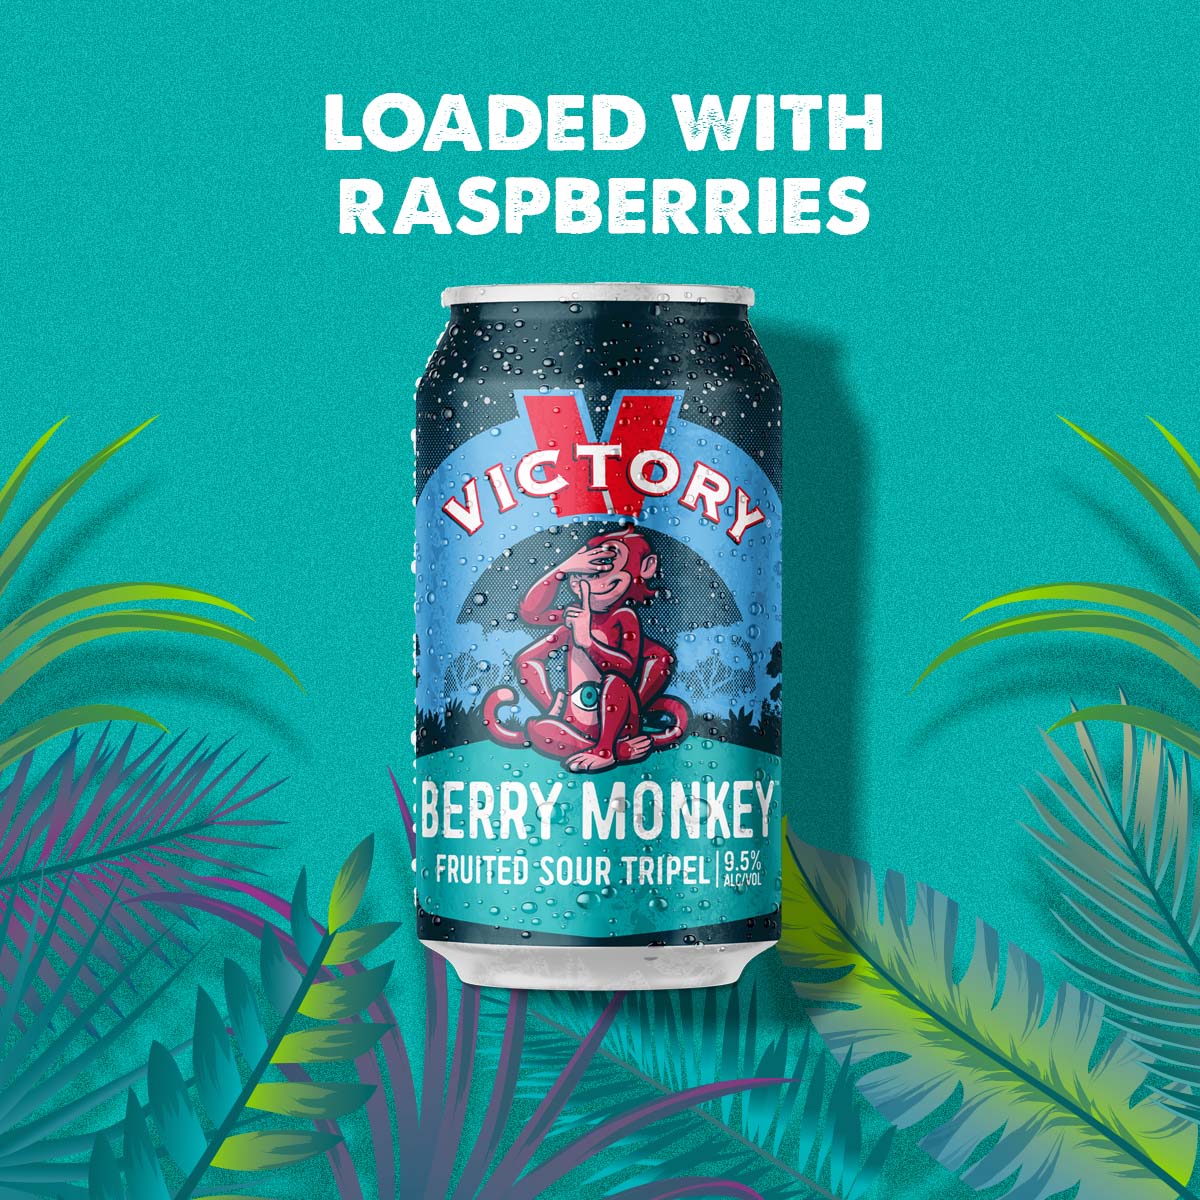 Berry Monkey: Loaded with raspberries